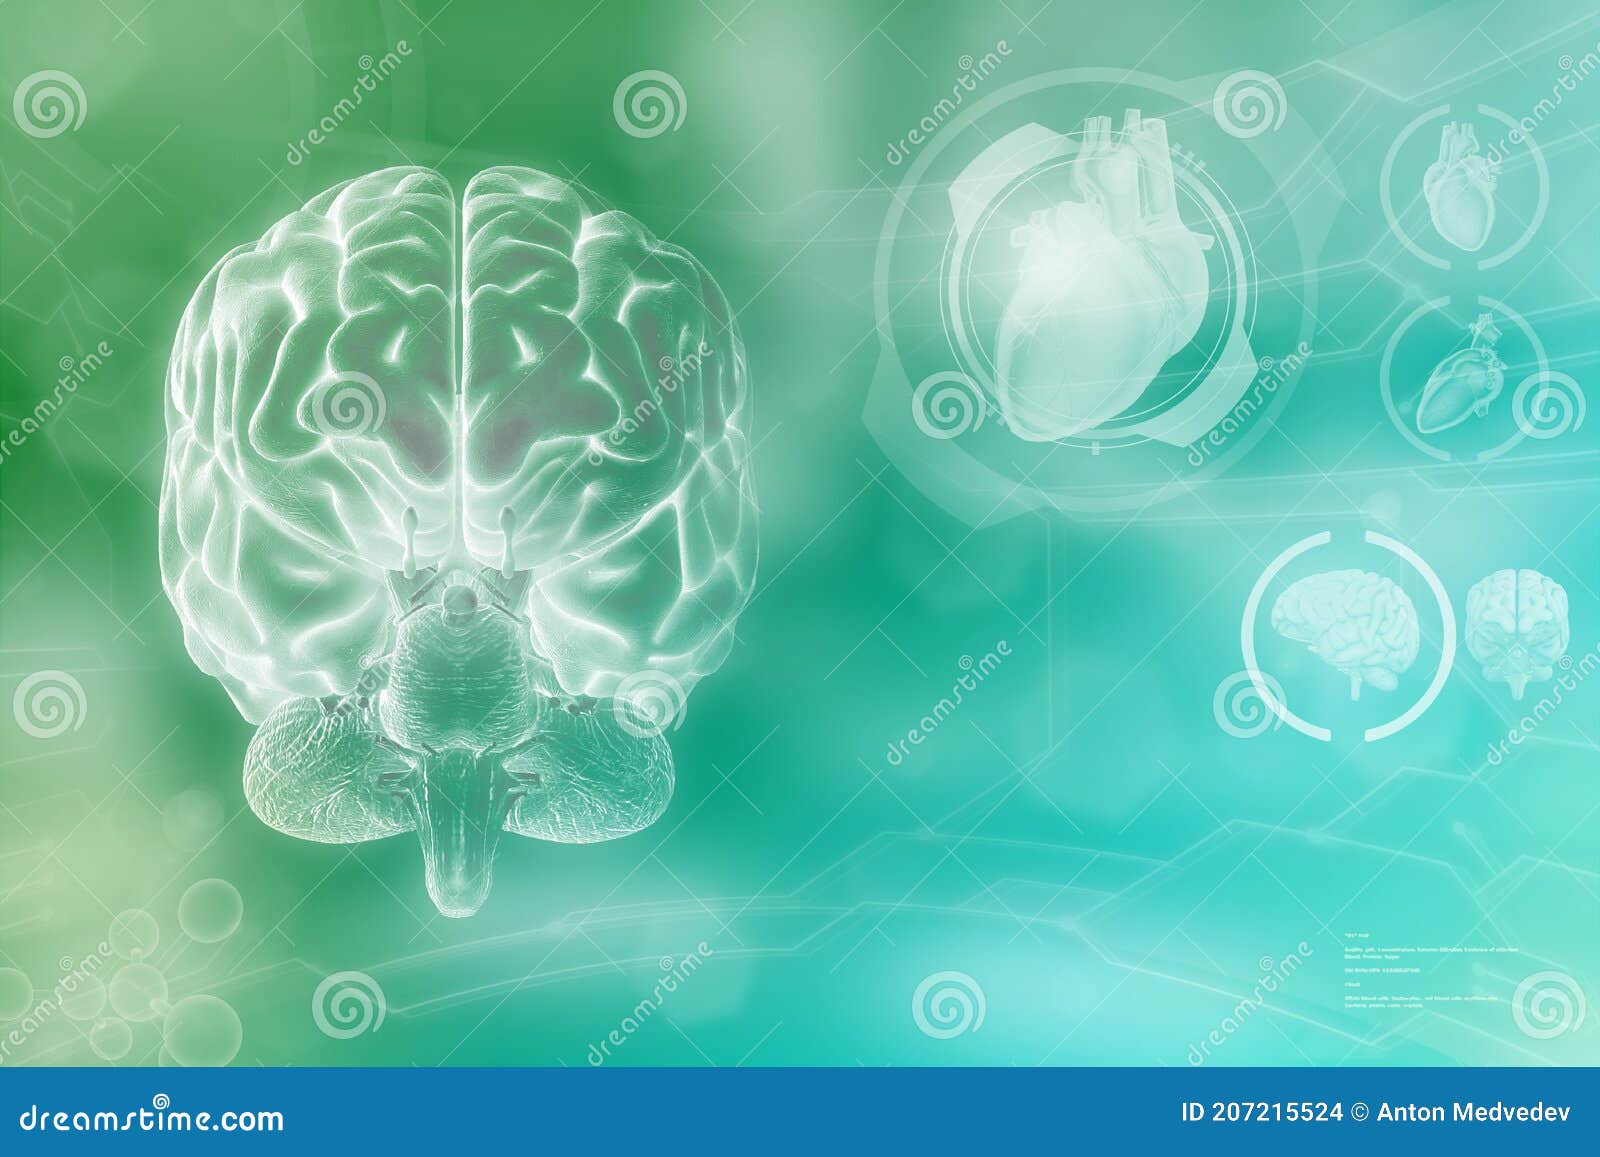 Human Brain, Nerve Discovery Concept - Very Detailed Electronic Texture ...